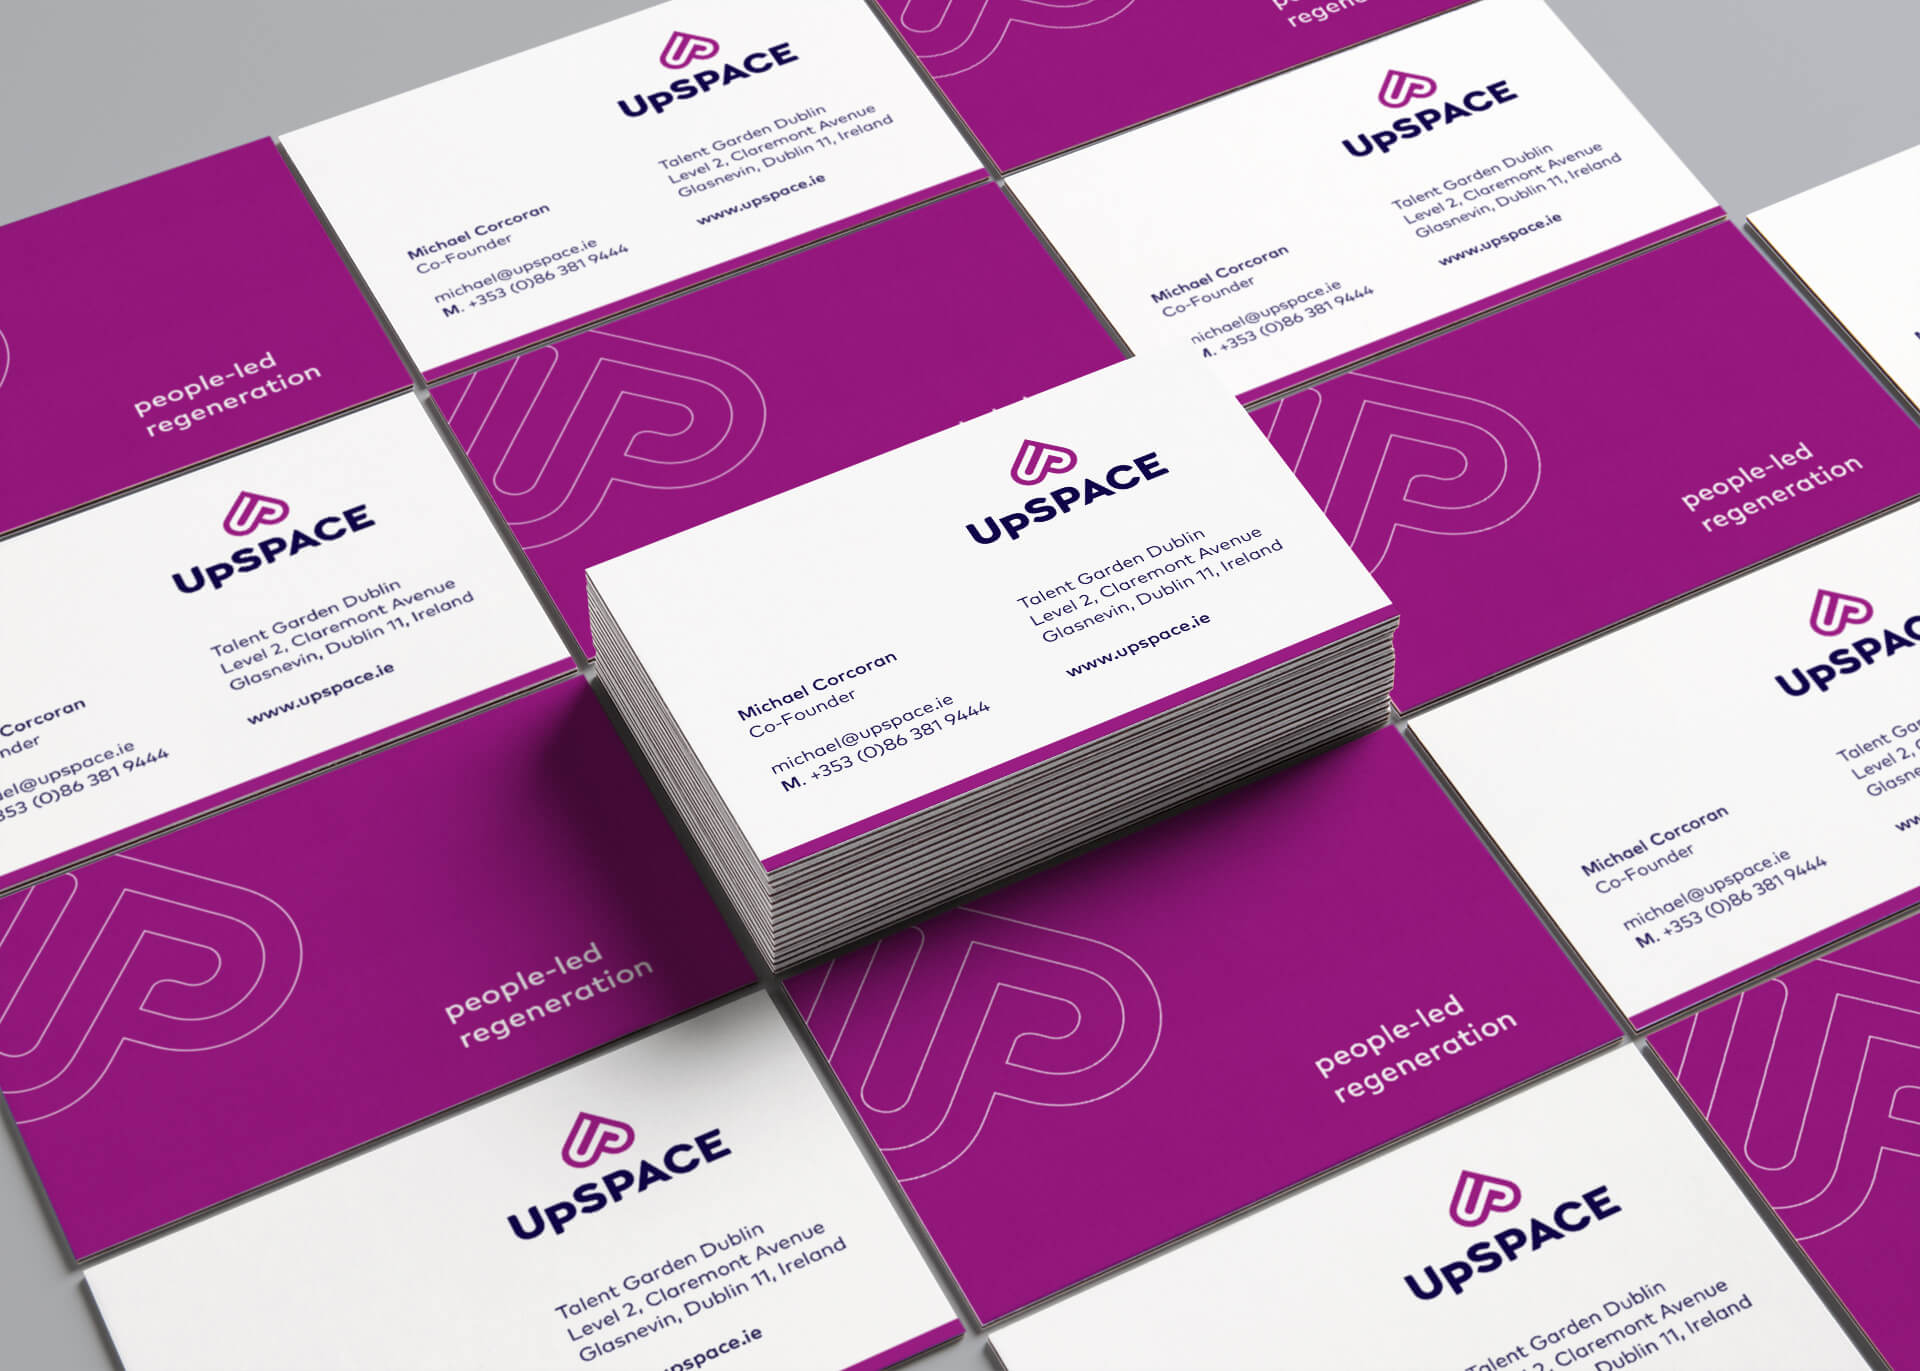 Property development business cards for UPSPACE